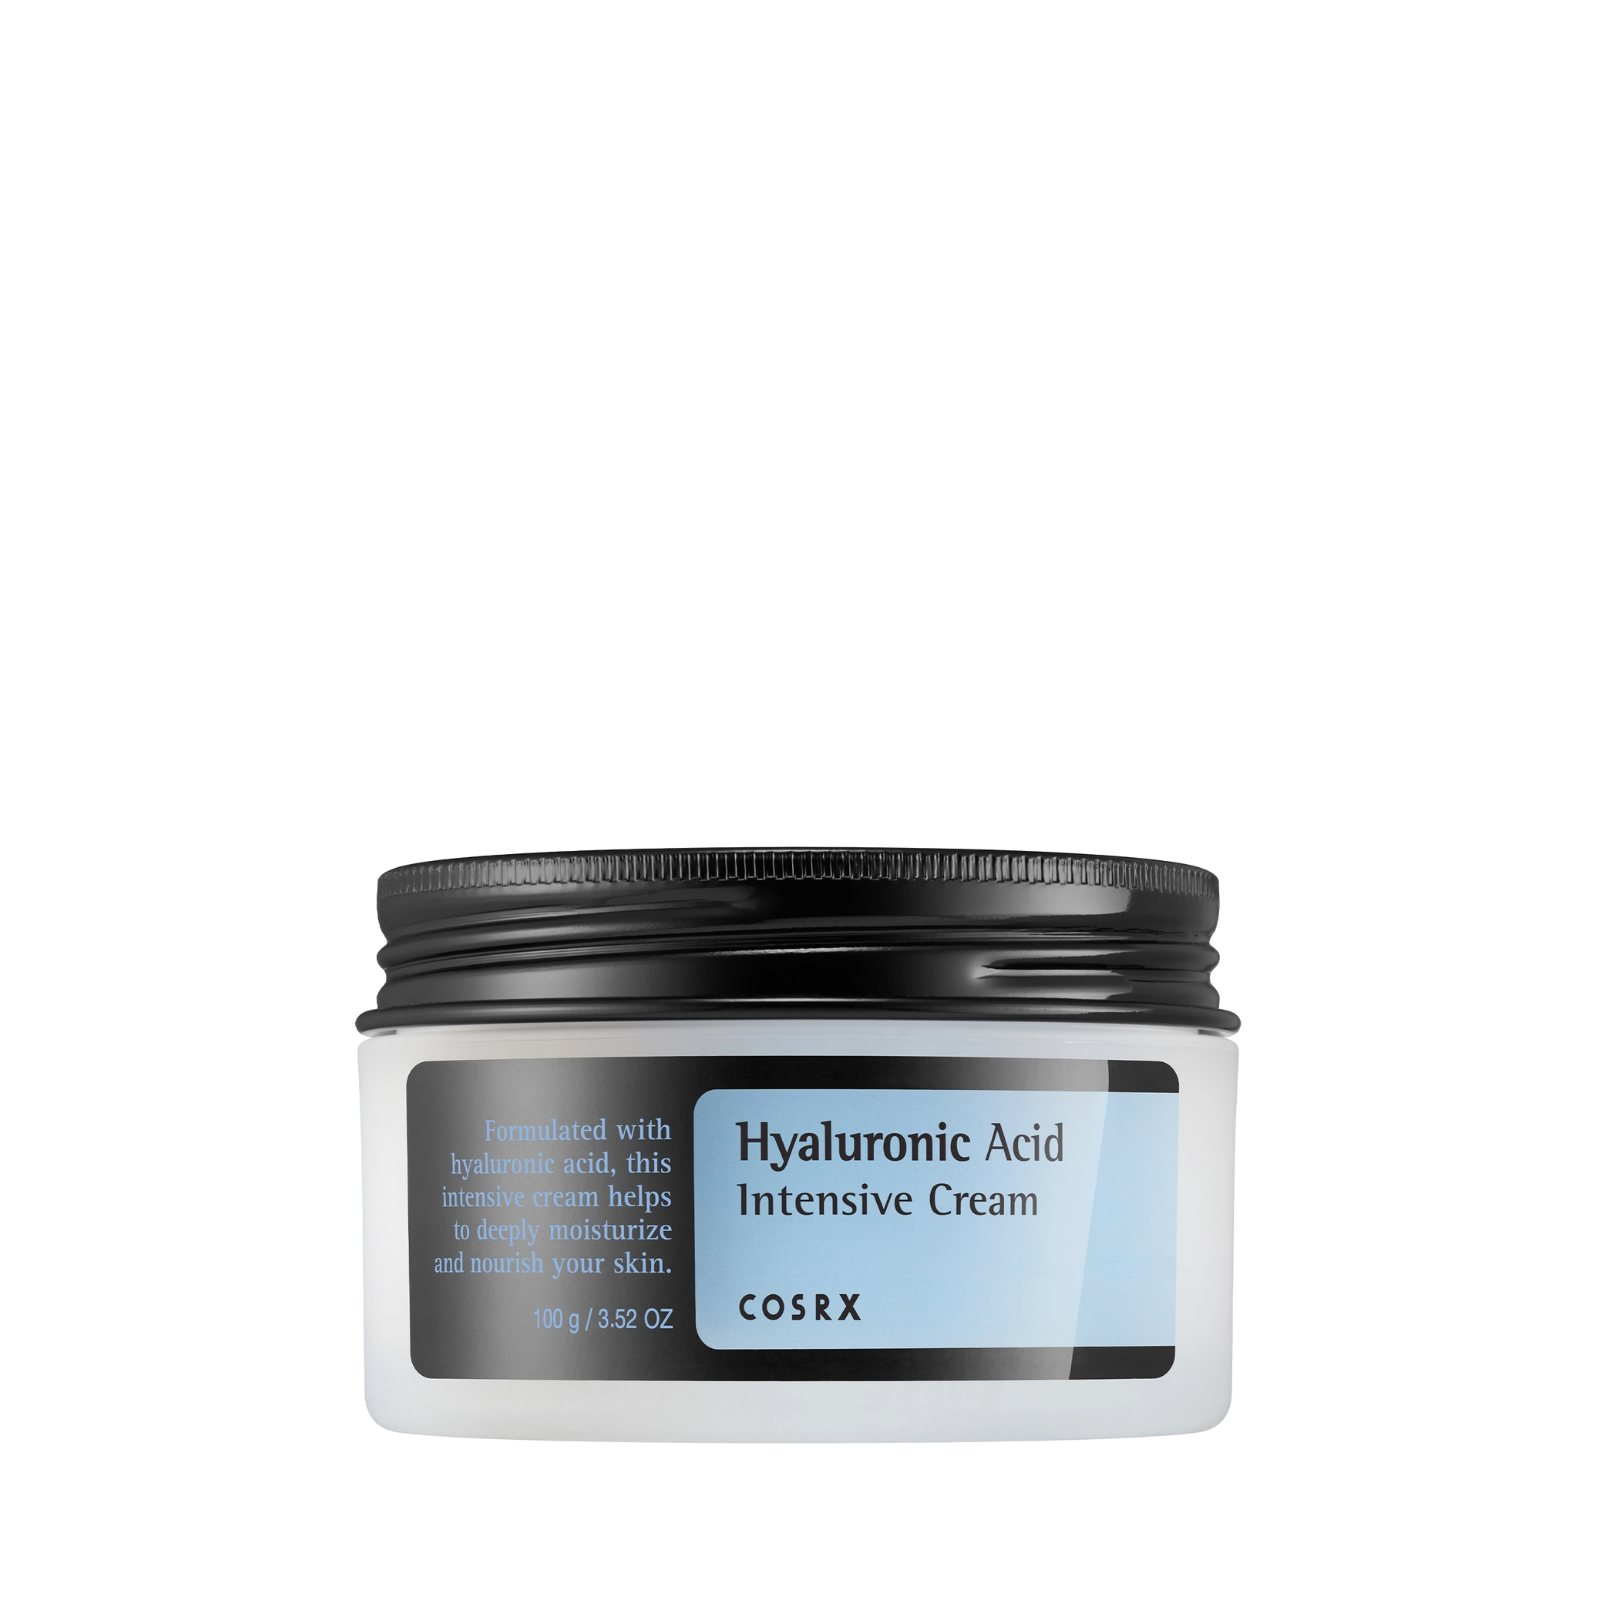 Moisturizing cream with hyaluronic acid by Cosrx (Cosrx Hyaluronic Acid Intensive Cream)